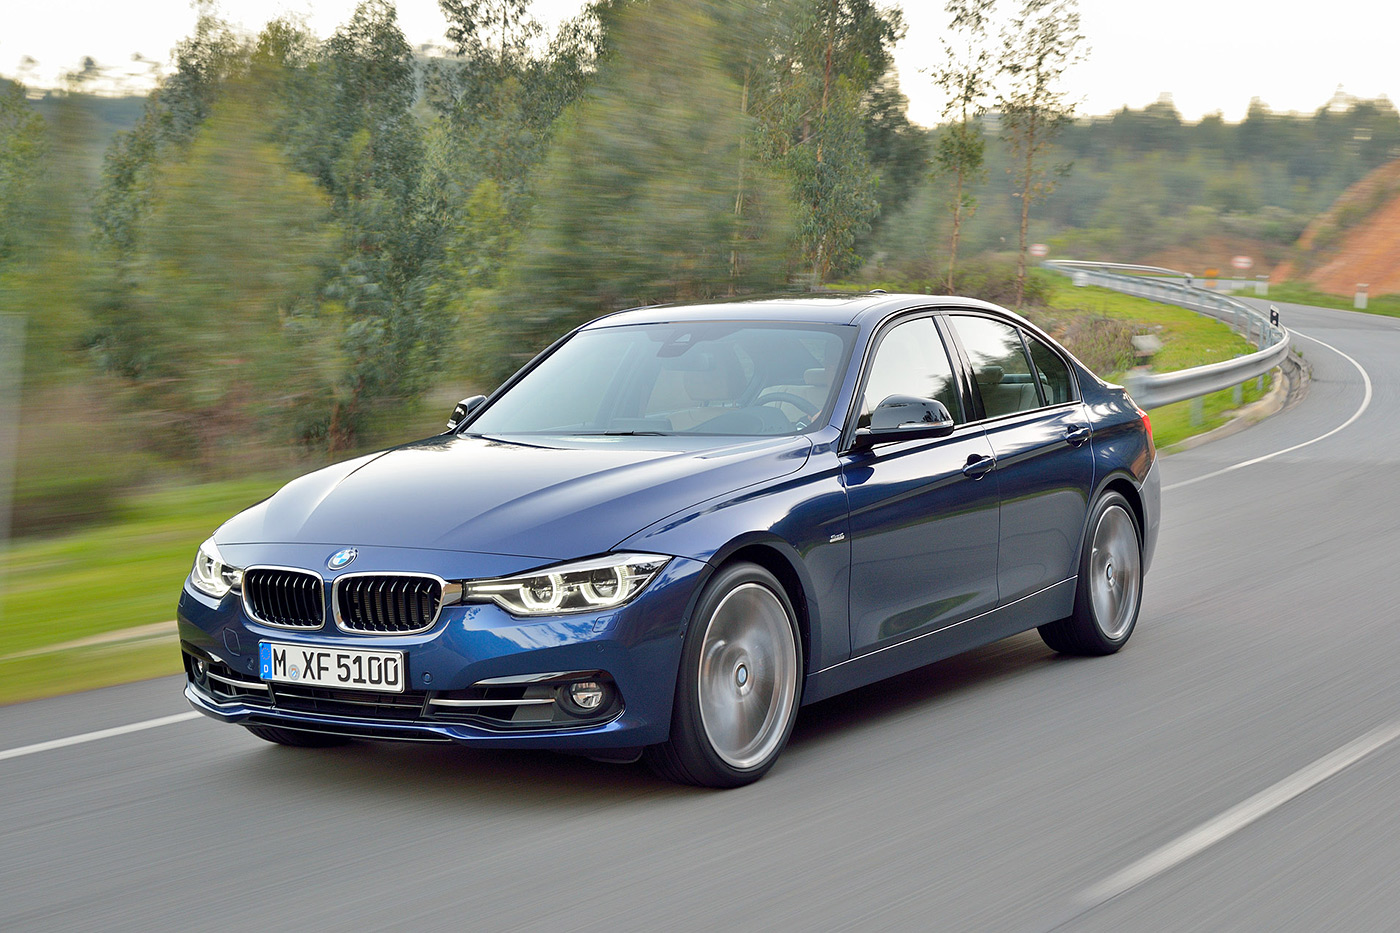 BMW 320d test. How much better is the G20 than the F30